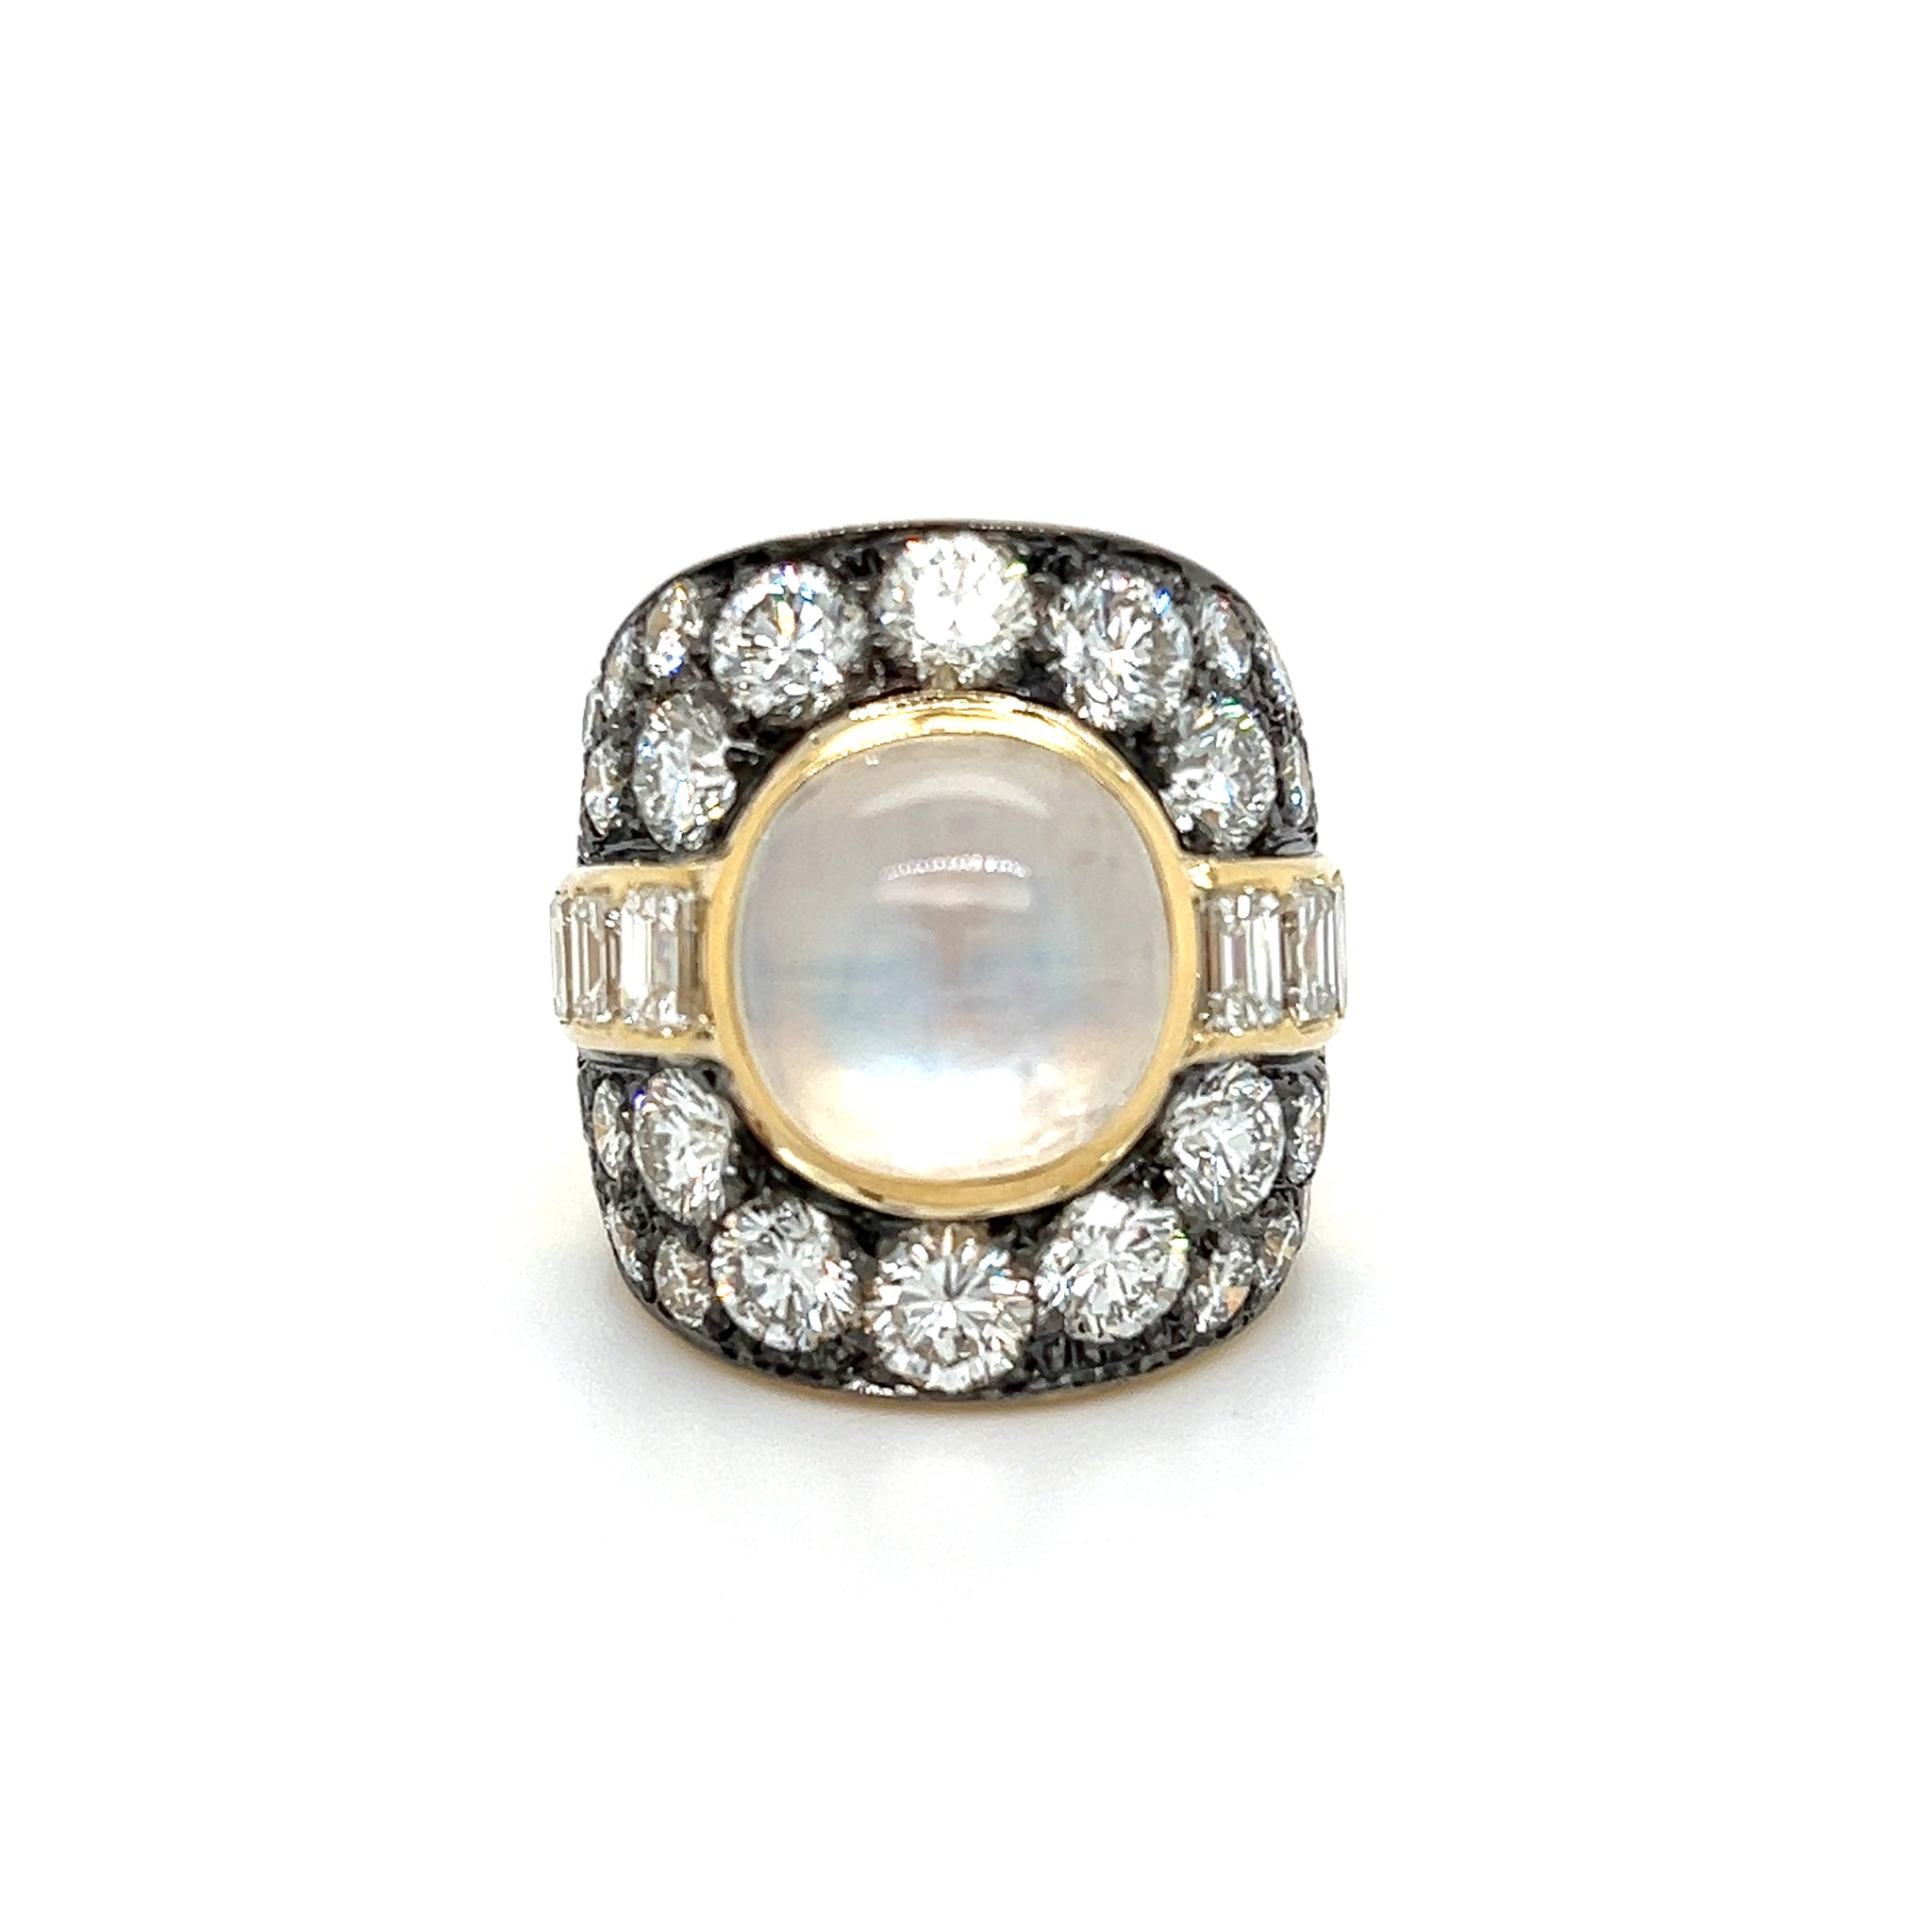 18kt Gold Cocktail Ring with Center Cabochon Moonstone